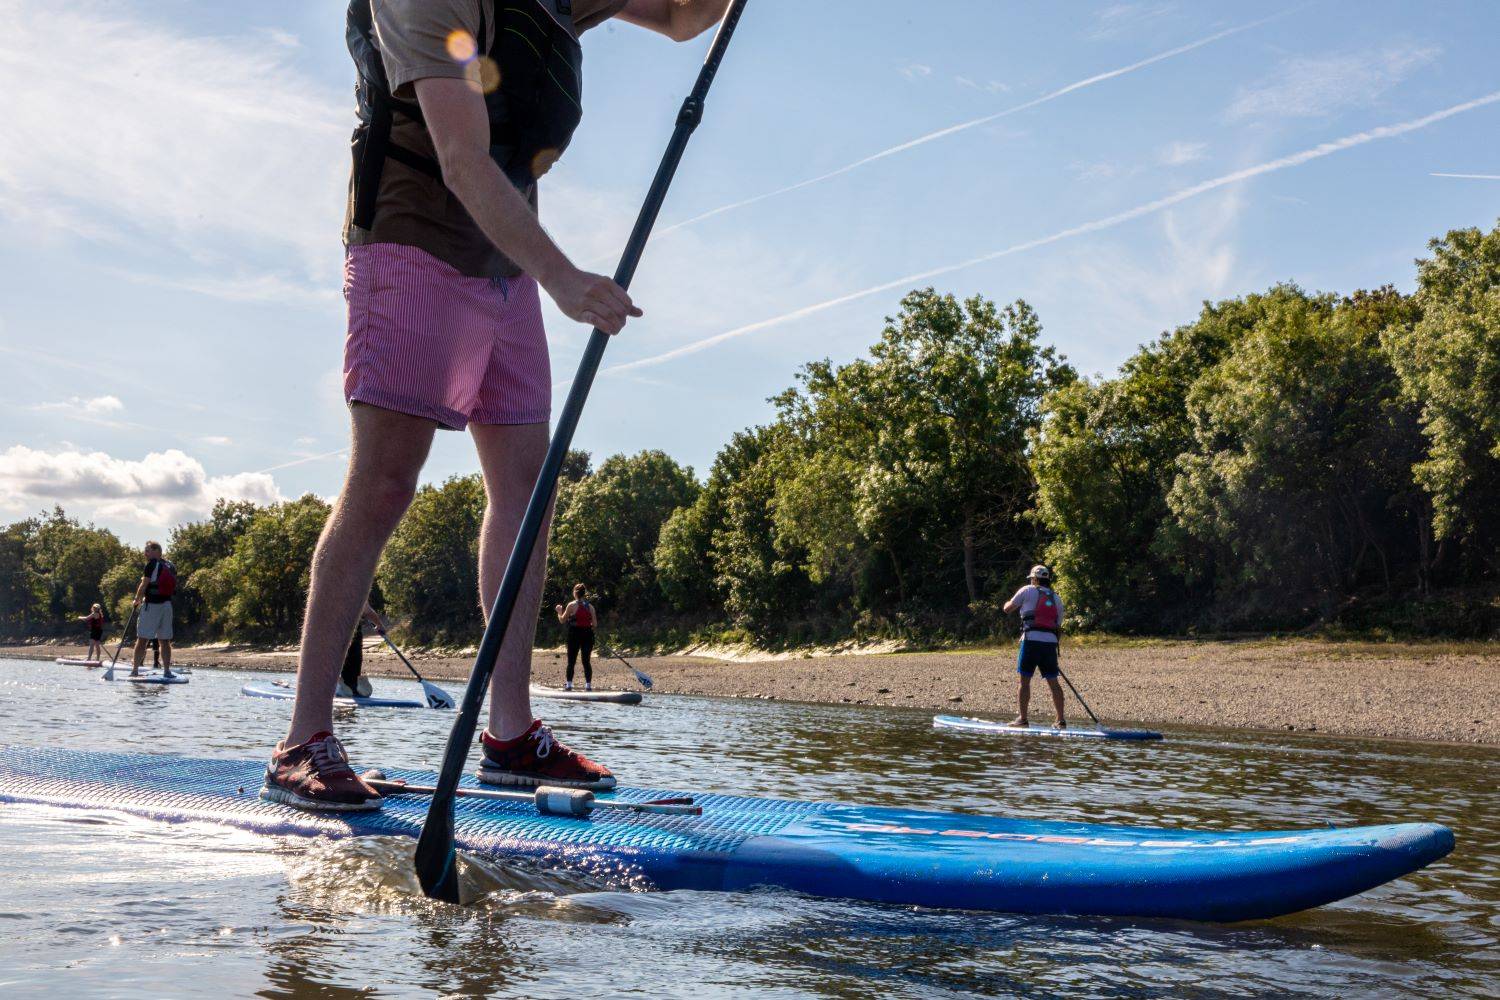 Paddle boarding on the River Thames in London